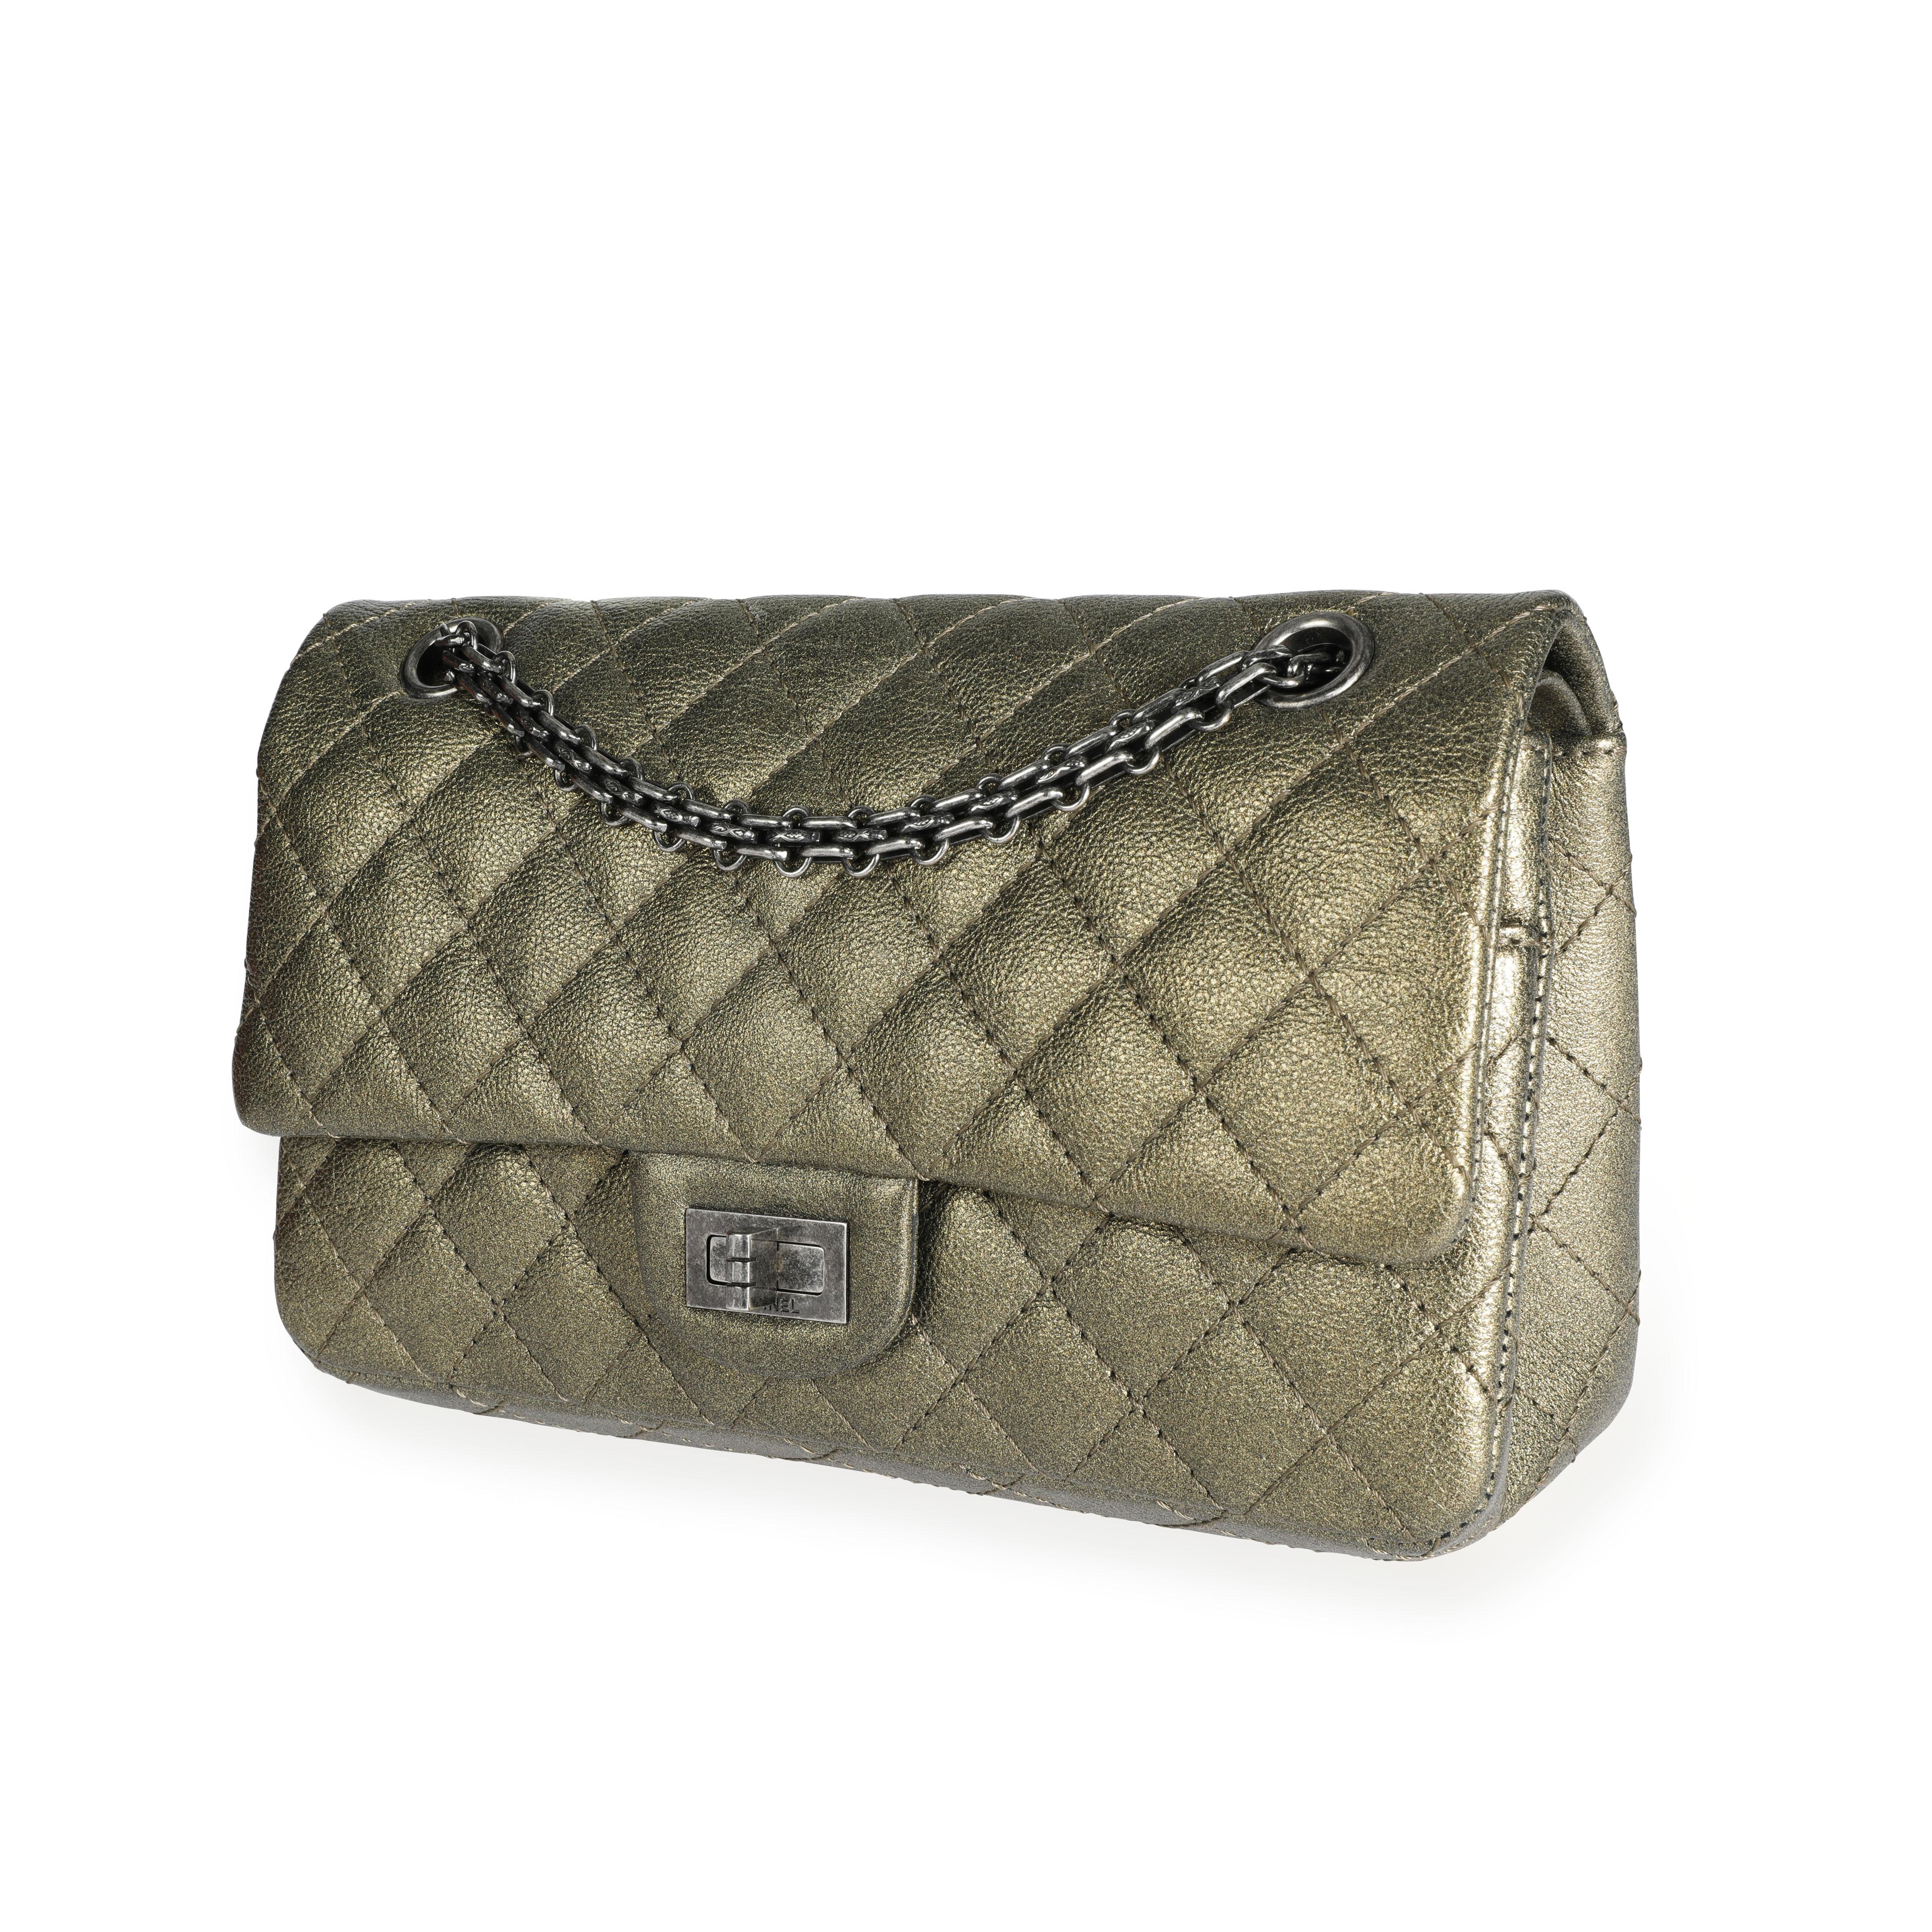 Chanel Gold Quilted Calfskin Reissue 2.55 225 Double Flap Bag 3